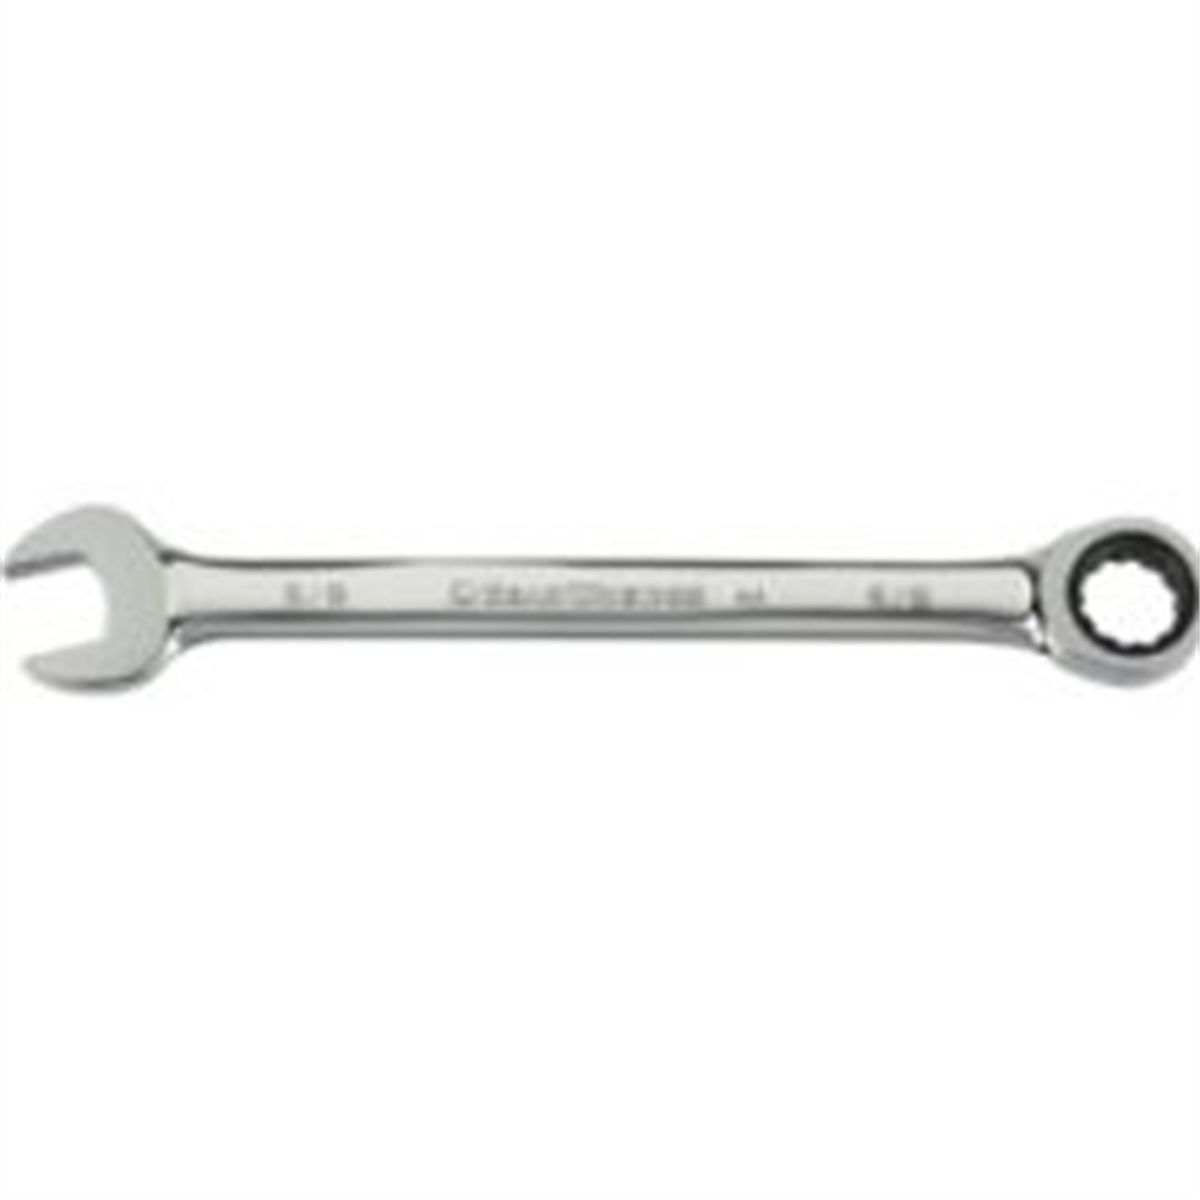 Combination Ratcheting Wrench 18mm